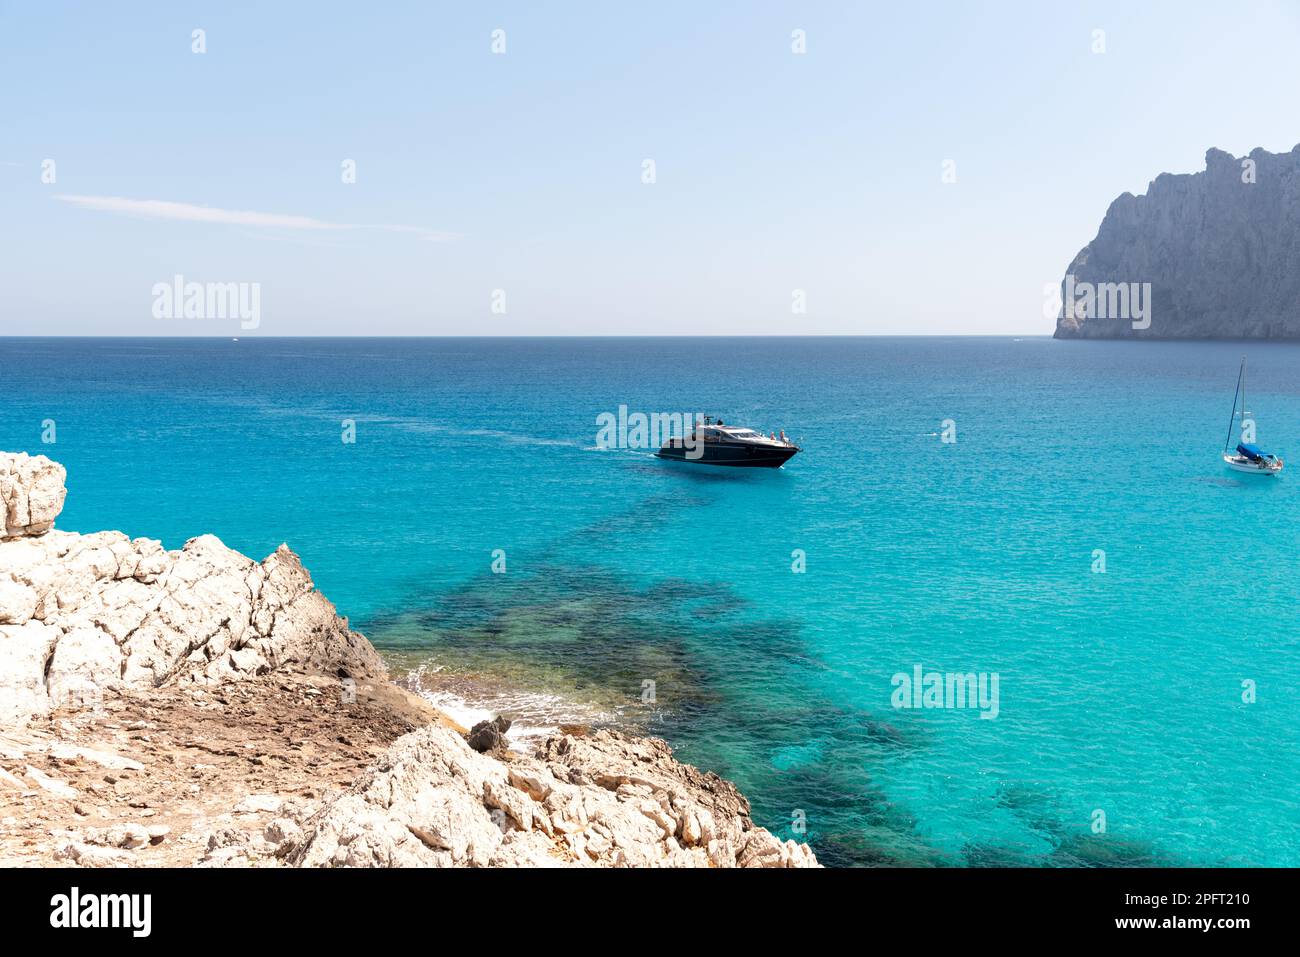 https://c8.alamy.com/comp/2PFT210/the-rugged-cliffs-and-crystal-clear-waters-of-cala-mesquida-in-mallorca-spain-provide-a-stunning-backdrop-for-an-unforgettable-day-at-the-beach-2PFT210.jpg